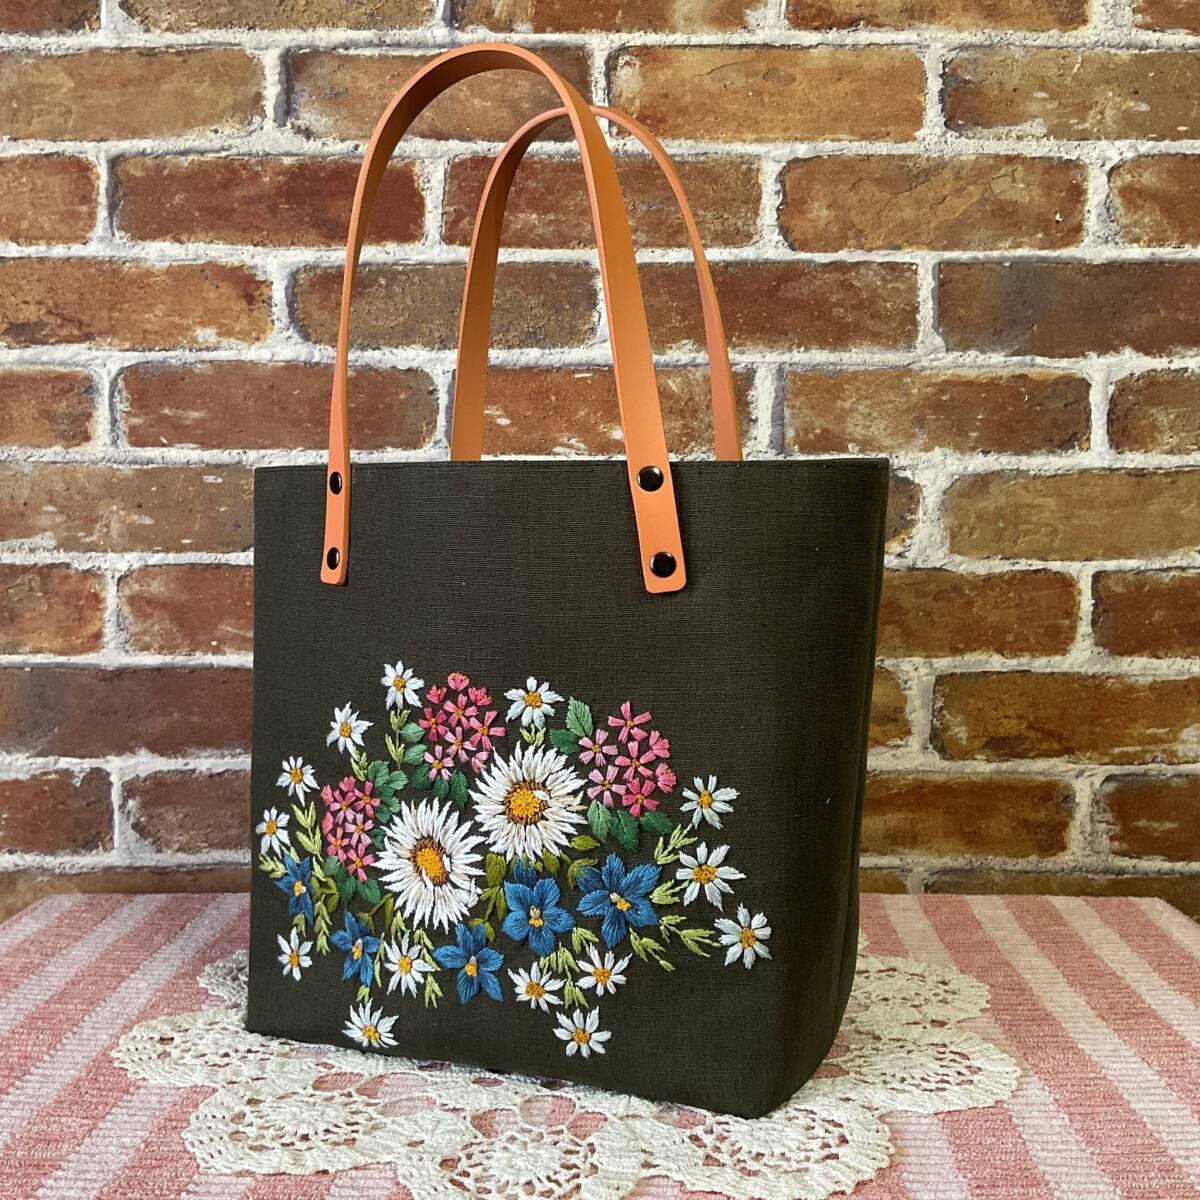  hand made hand embroidery linen Switzerland Alps. flower original leather keep hand tote bag 